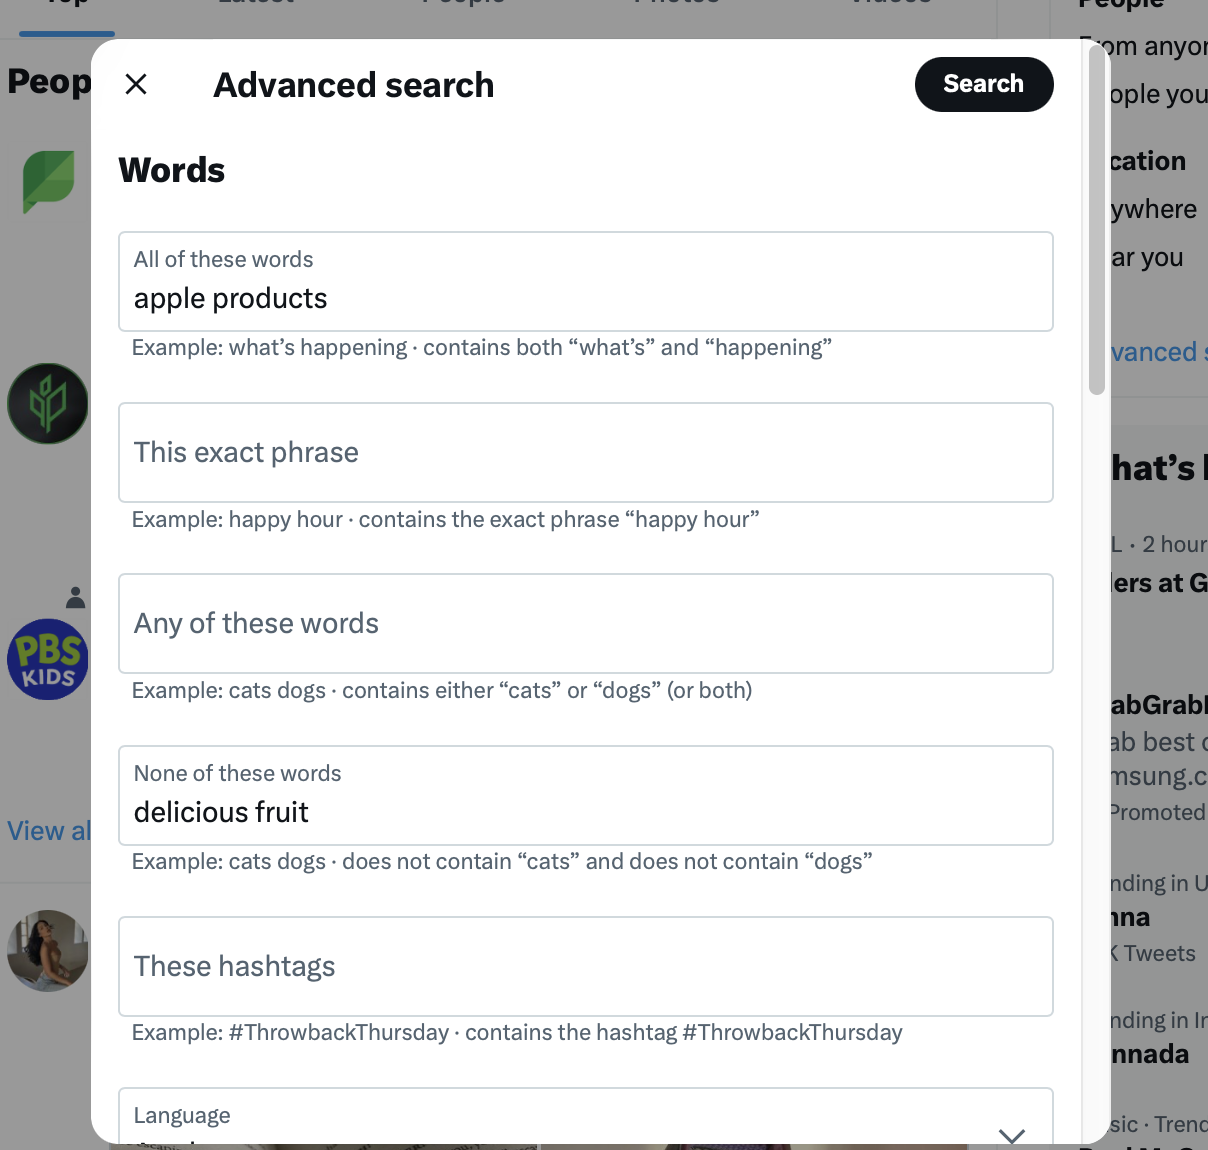 twitter advanced search window with fields for different words to include or exclude in the search